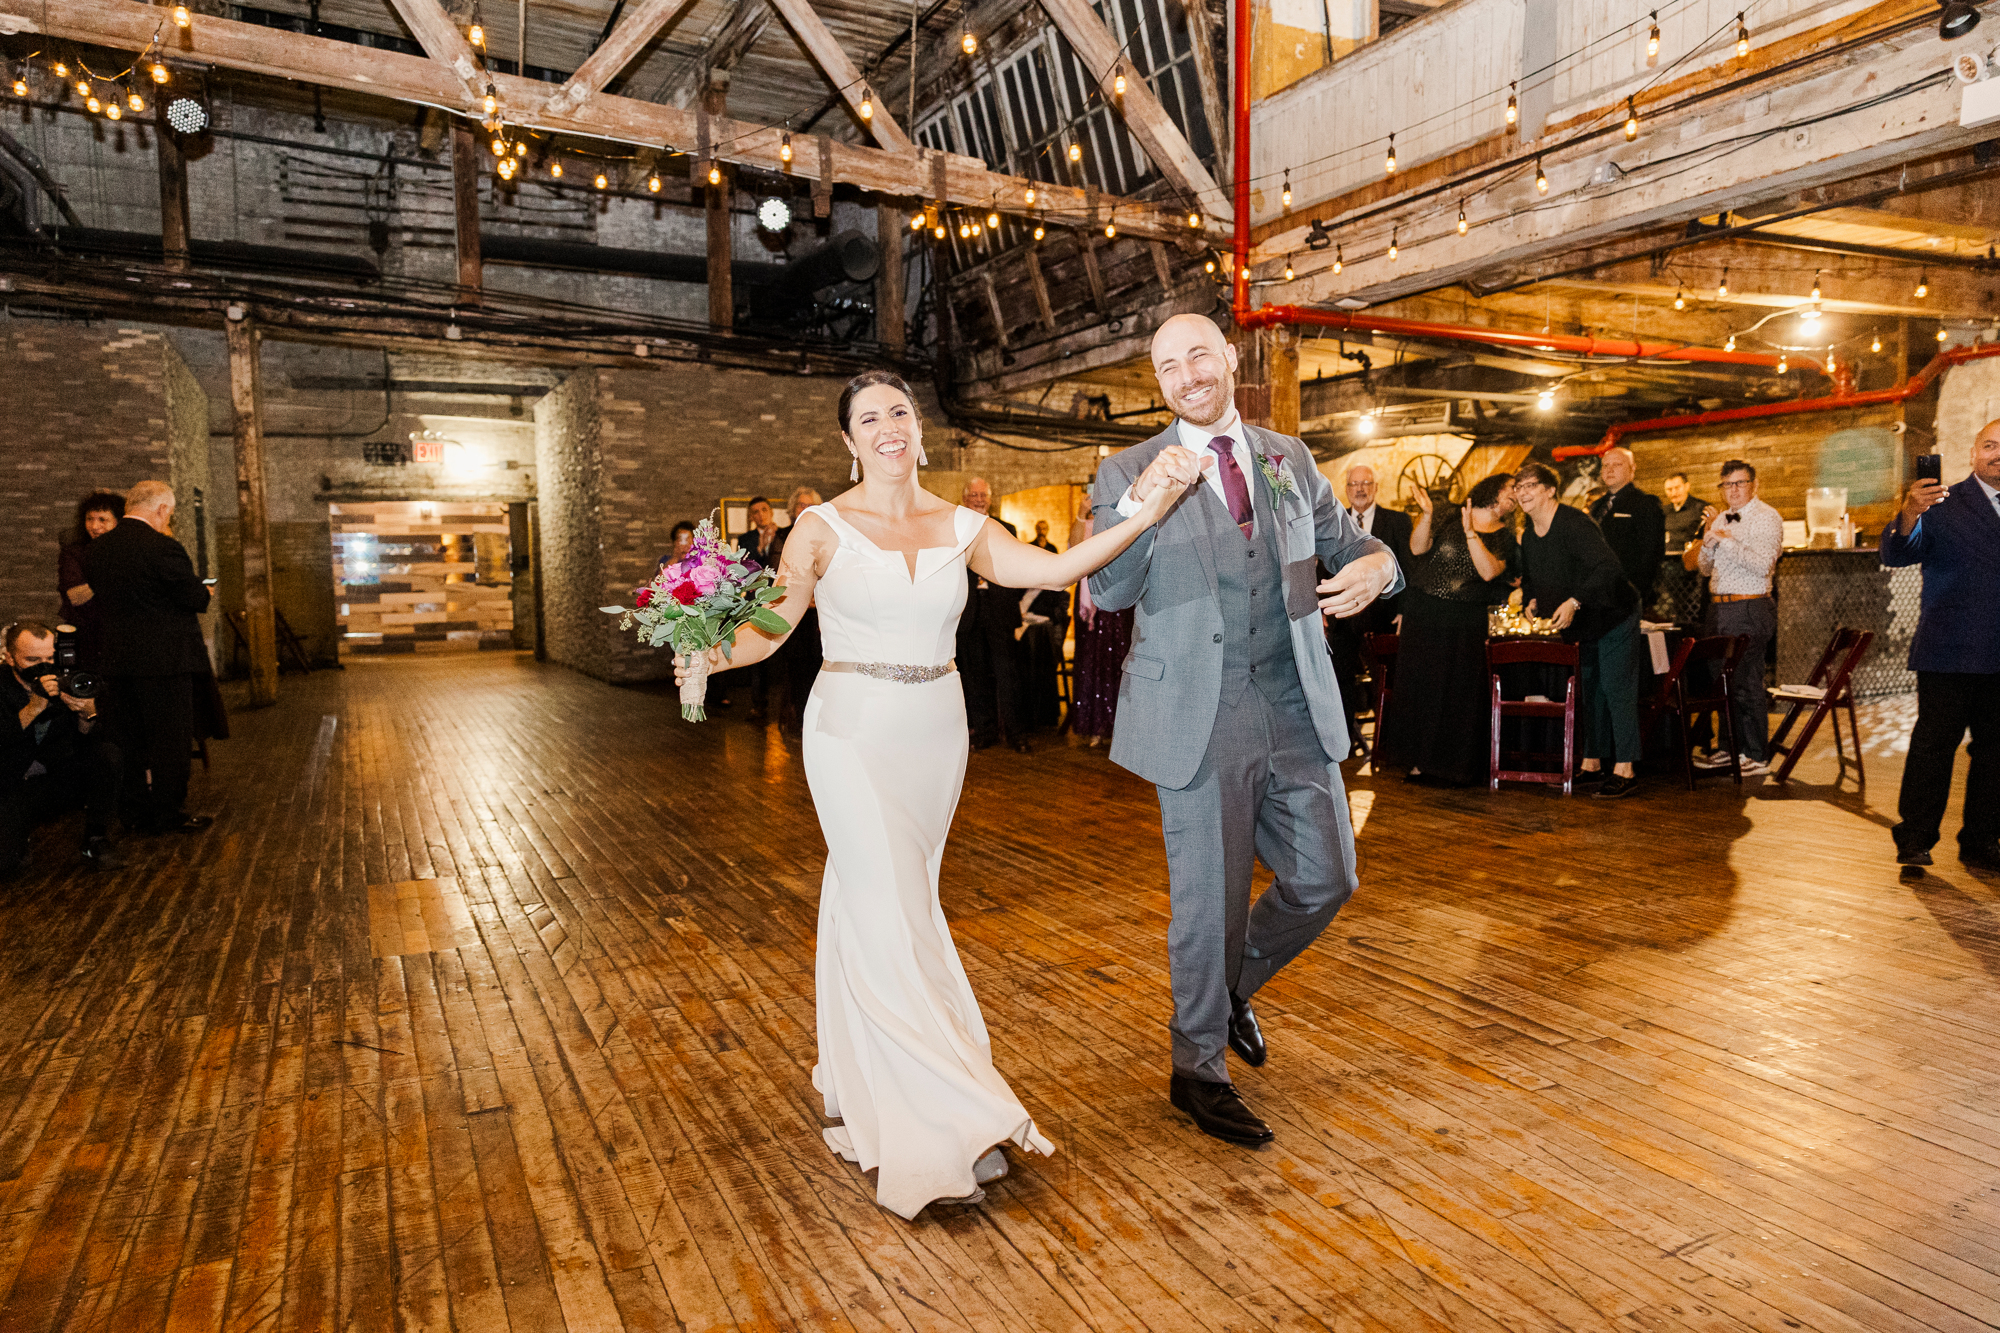 Timeless Wedding Photos at Greenpoint Loft in Brooklyn